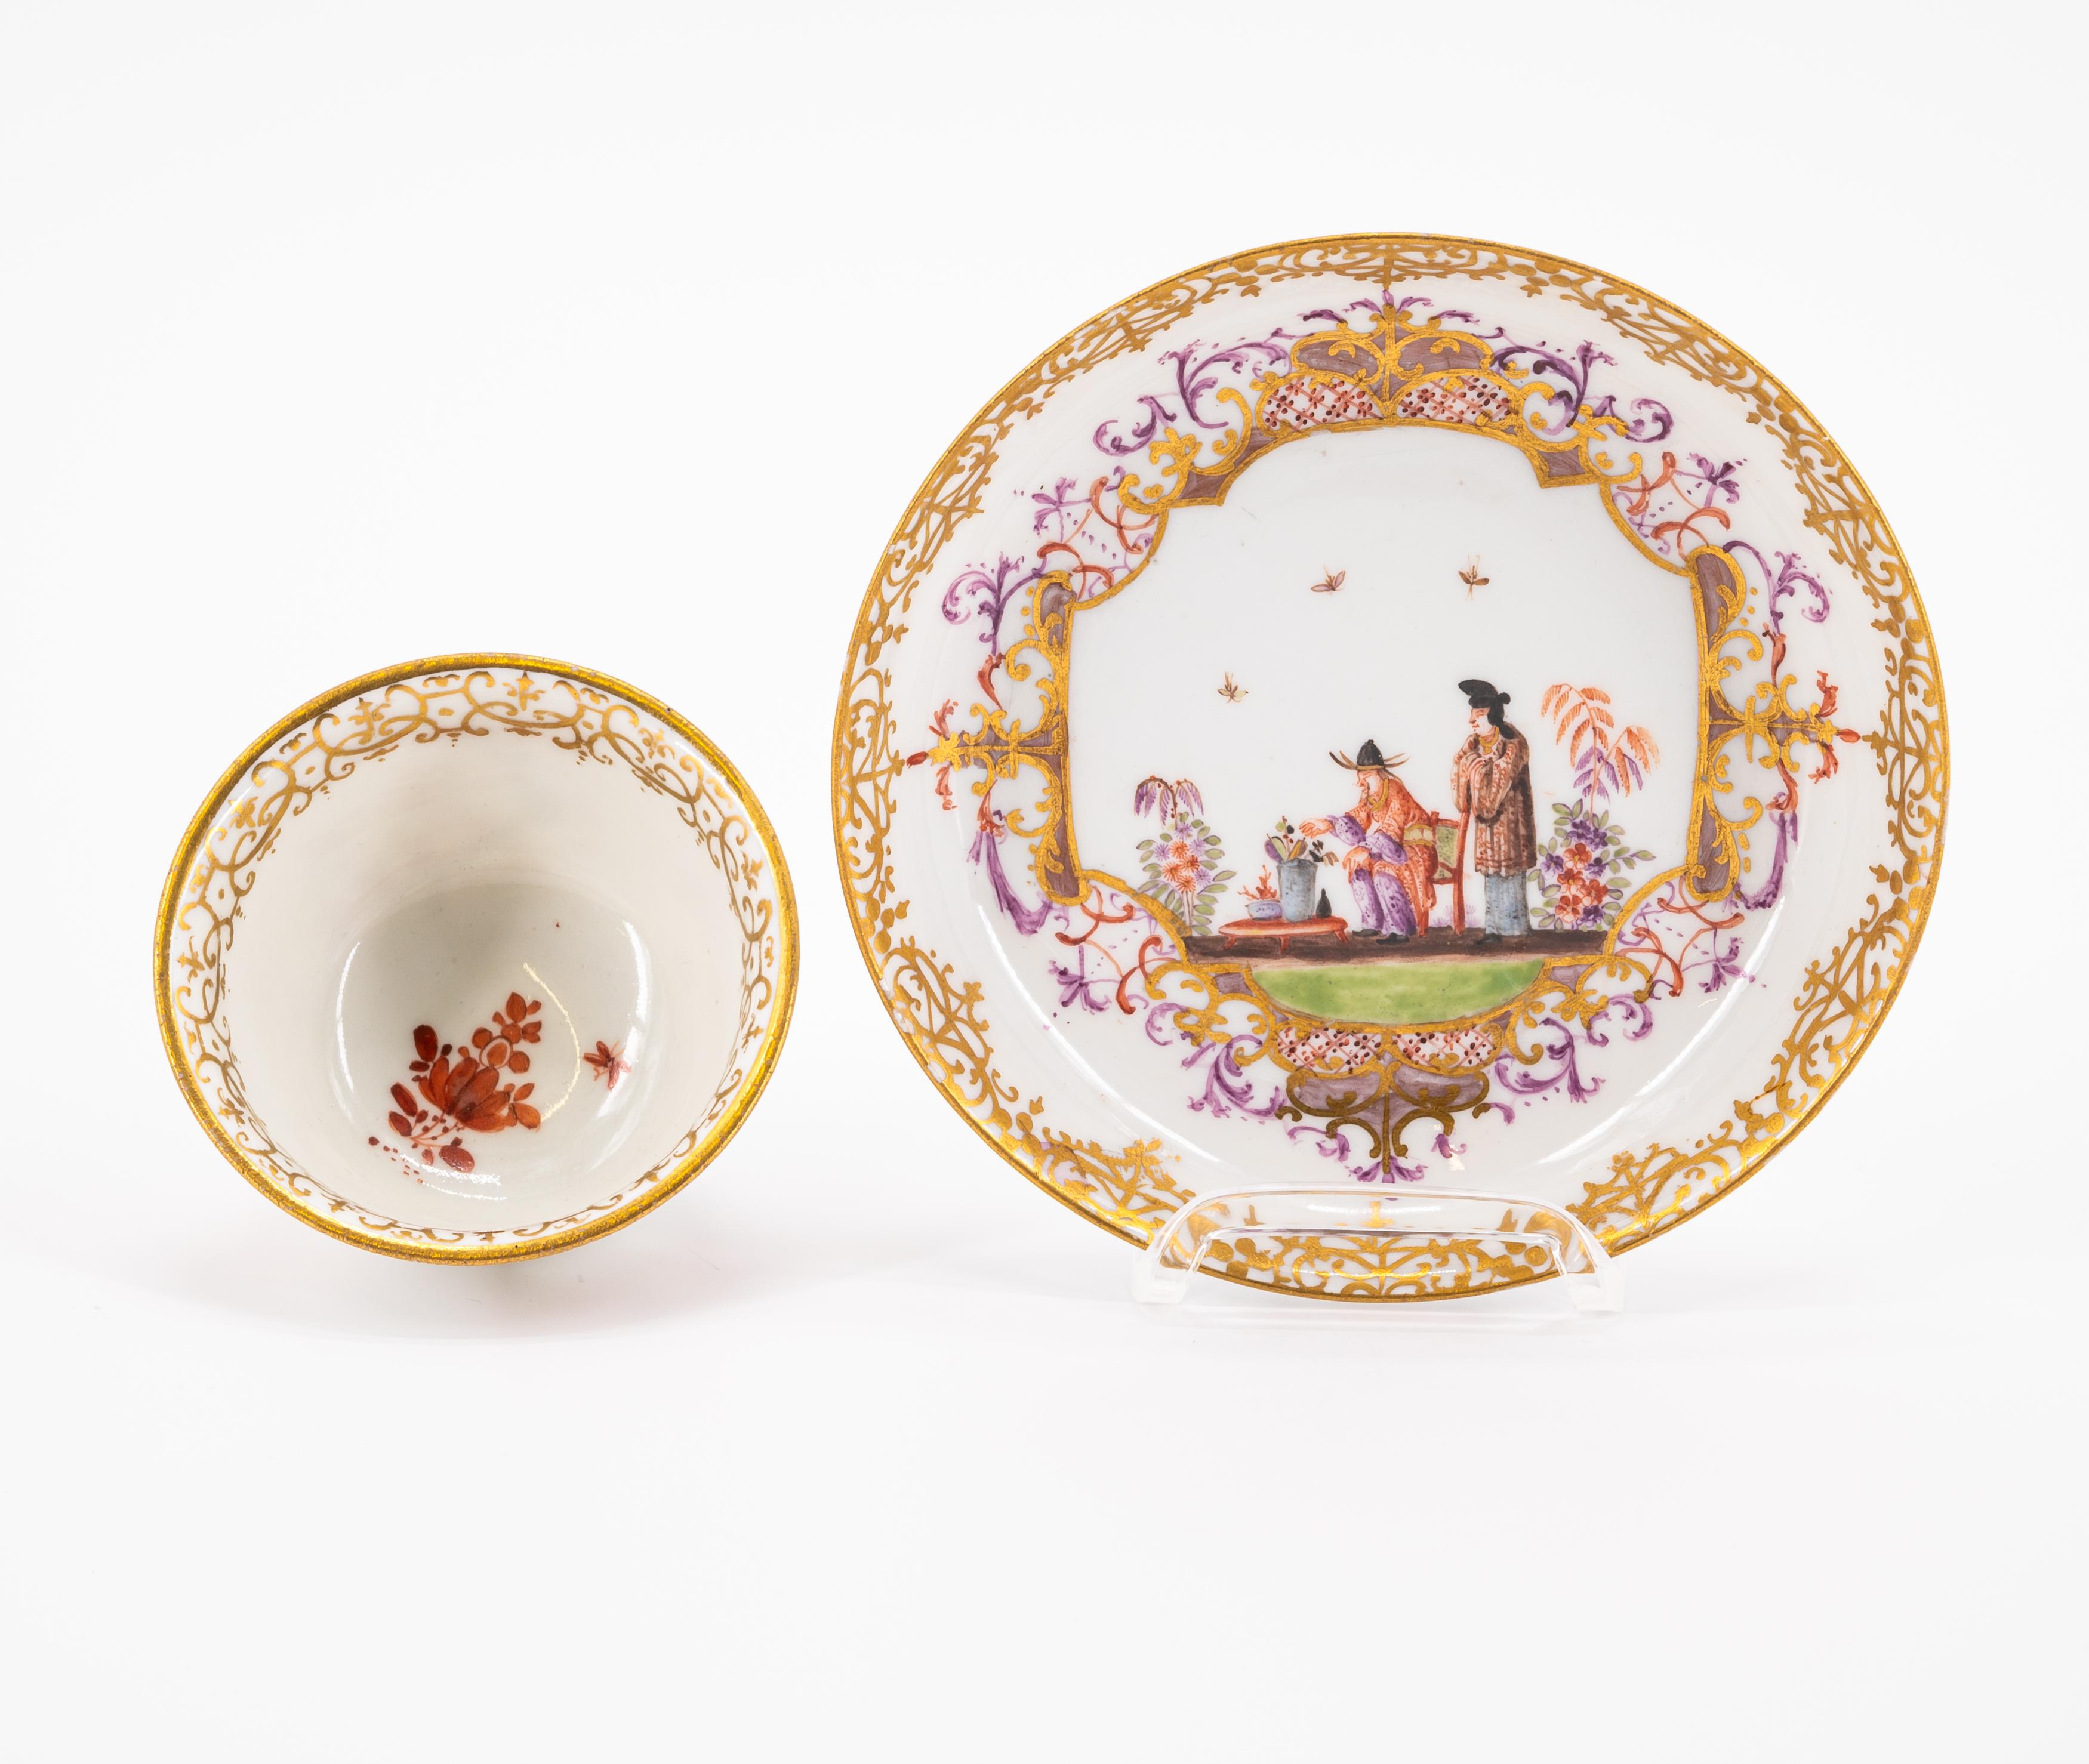 TWO PORCELAIN TEA BOWLS WITH SAUERES AND CHINOISERIES - Image 10 of 11